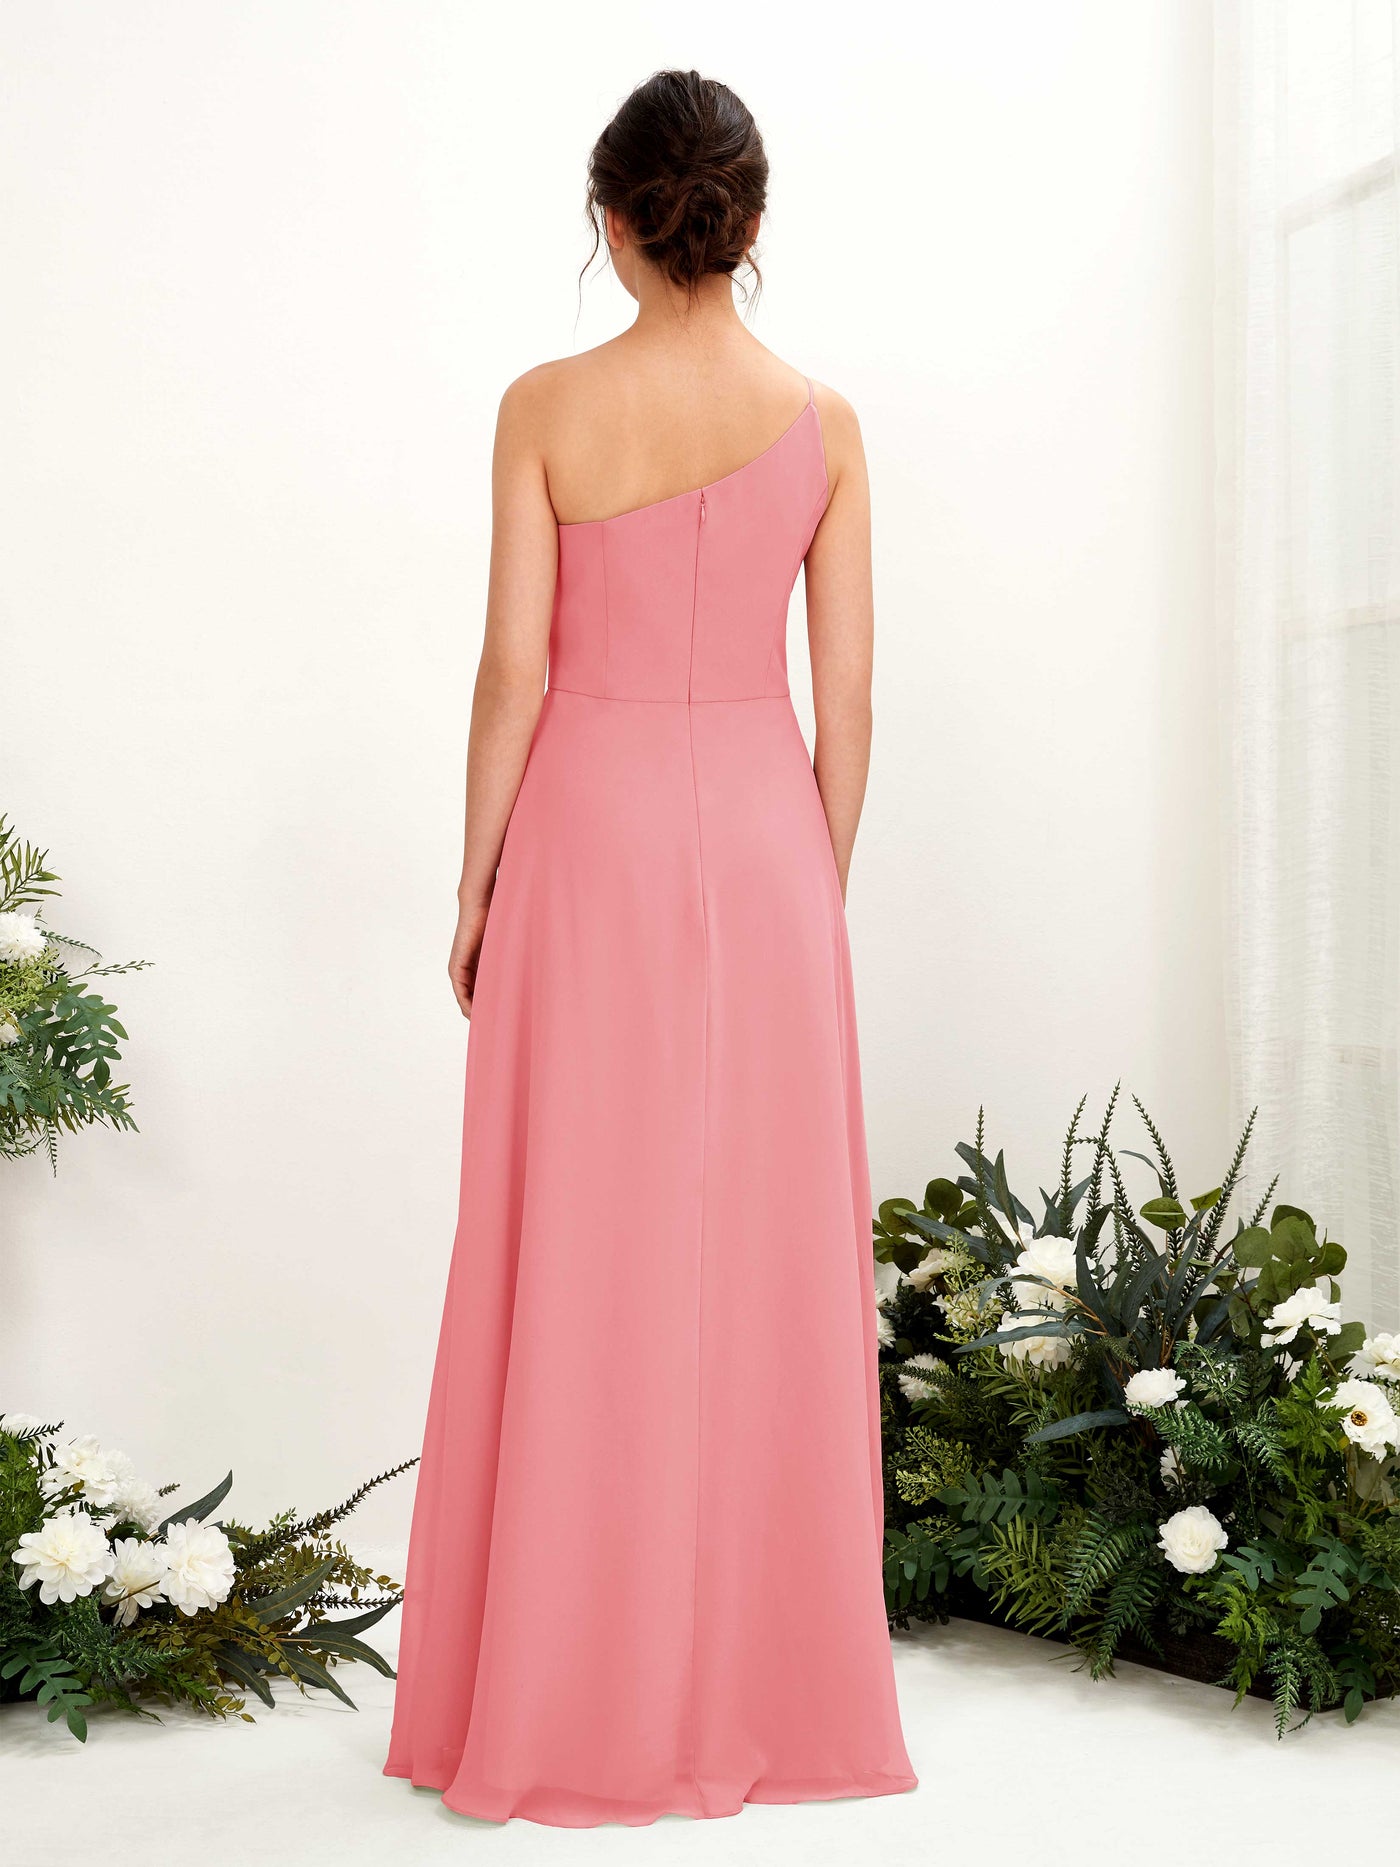 Coral Pink Bridesmaid Dresses Bridesmaid Dress A-line Chiffon One Shoulder Full Length Sleeveless Wedding Party Dress (81225730)#color_coral-pink